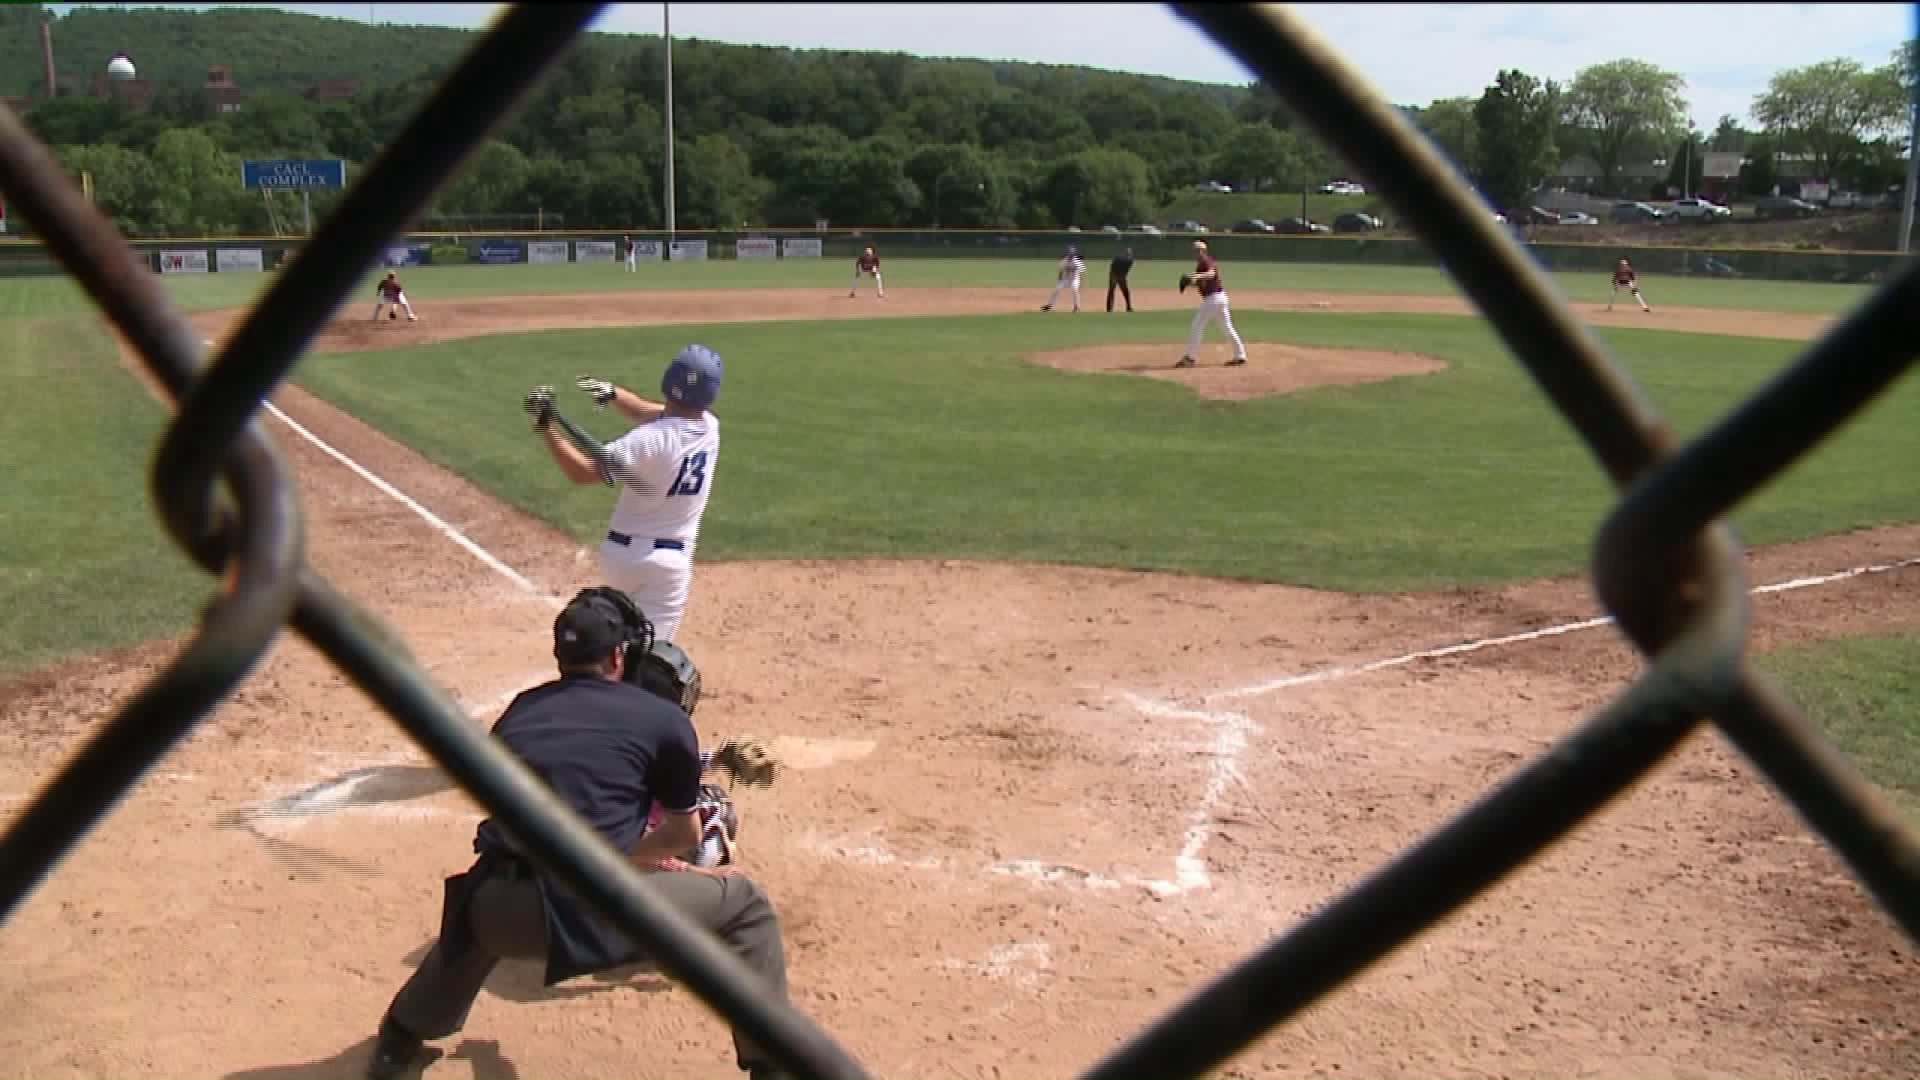 Blue Mountain Falls to Whitehall in DXI 5A Semifinals